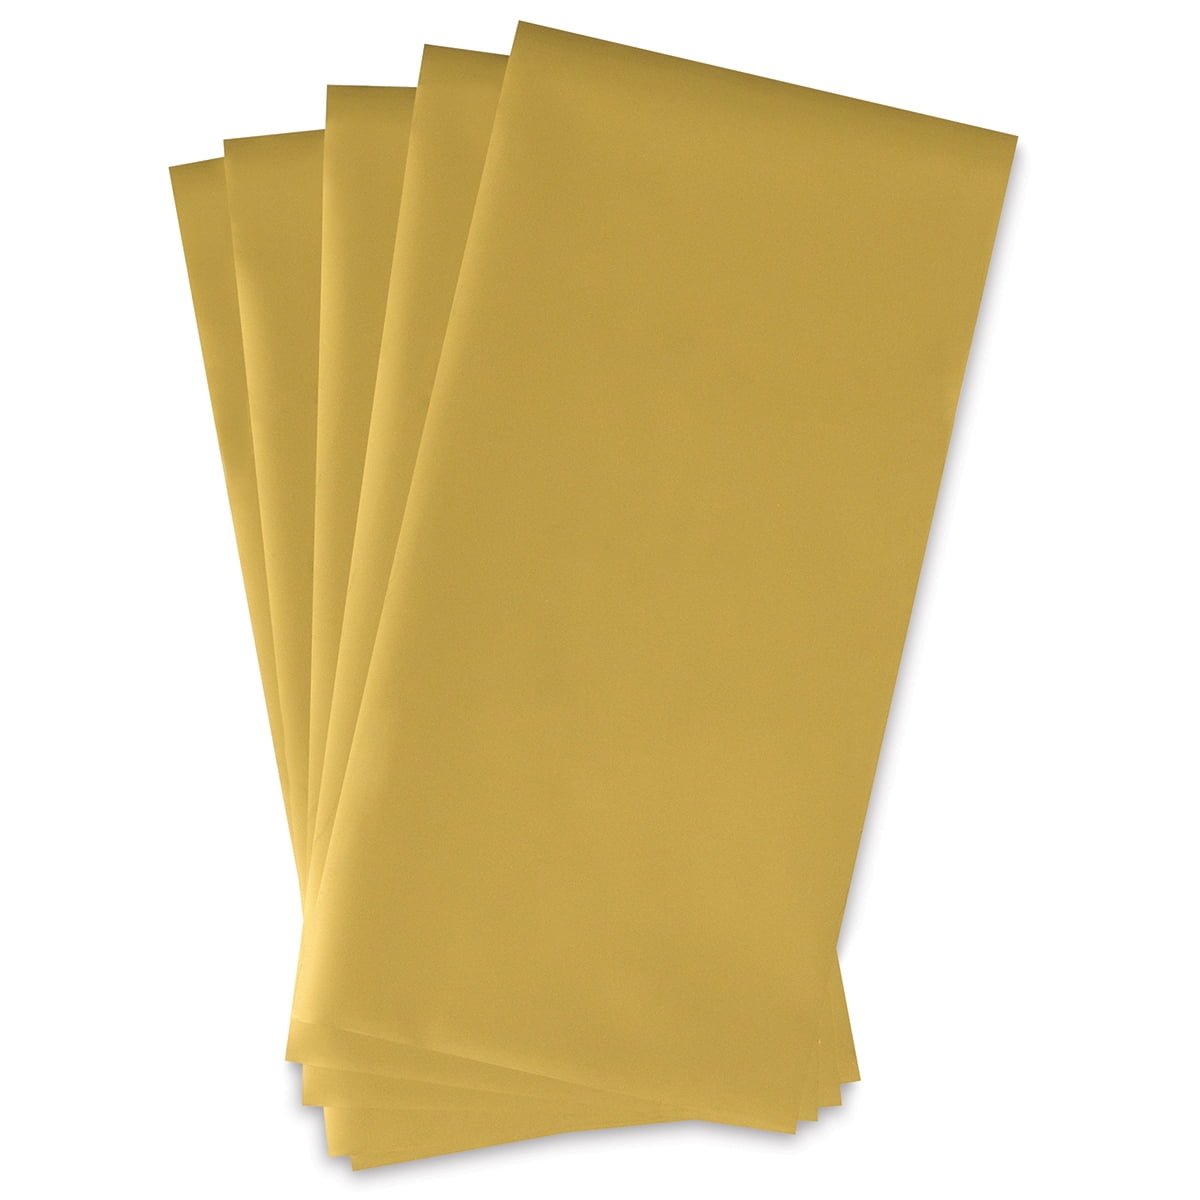 Crafters Square Permanent Adhesive Vinyl Paper Yellow (3 Packs